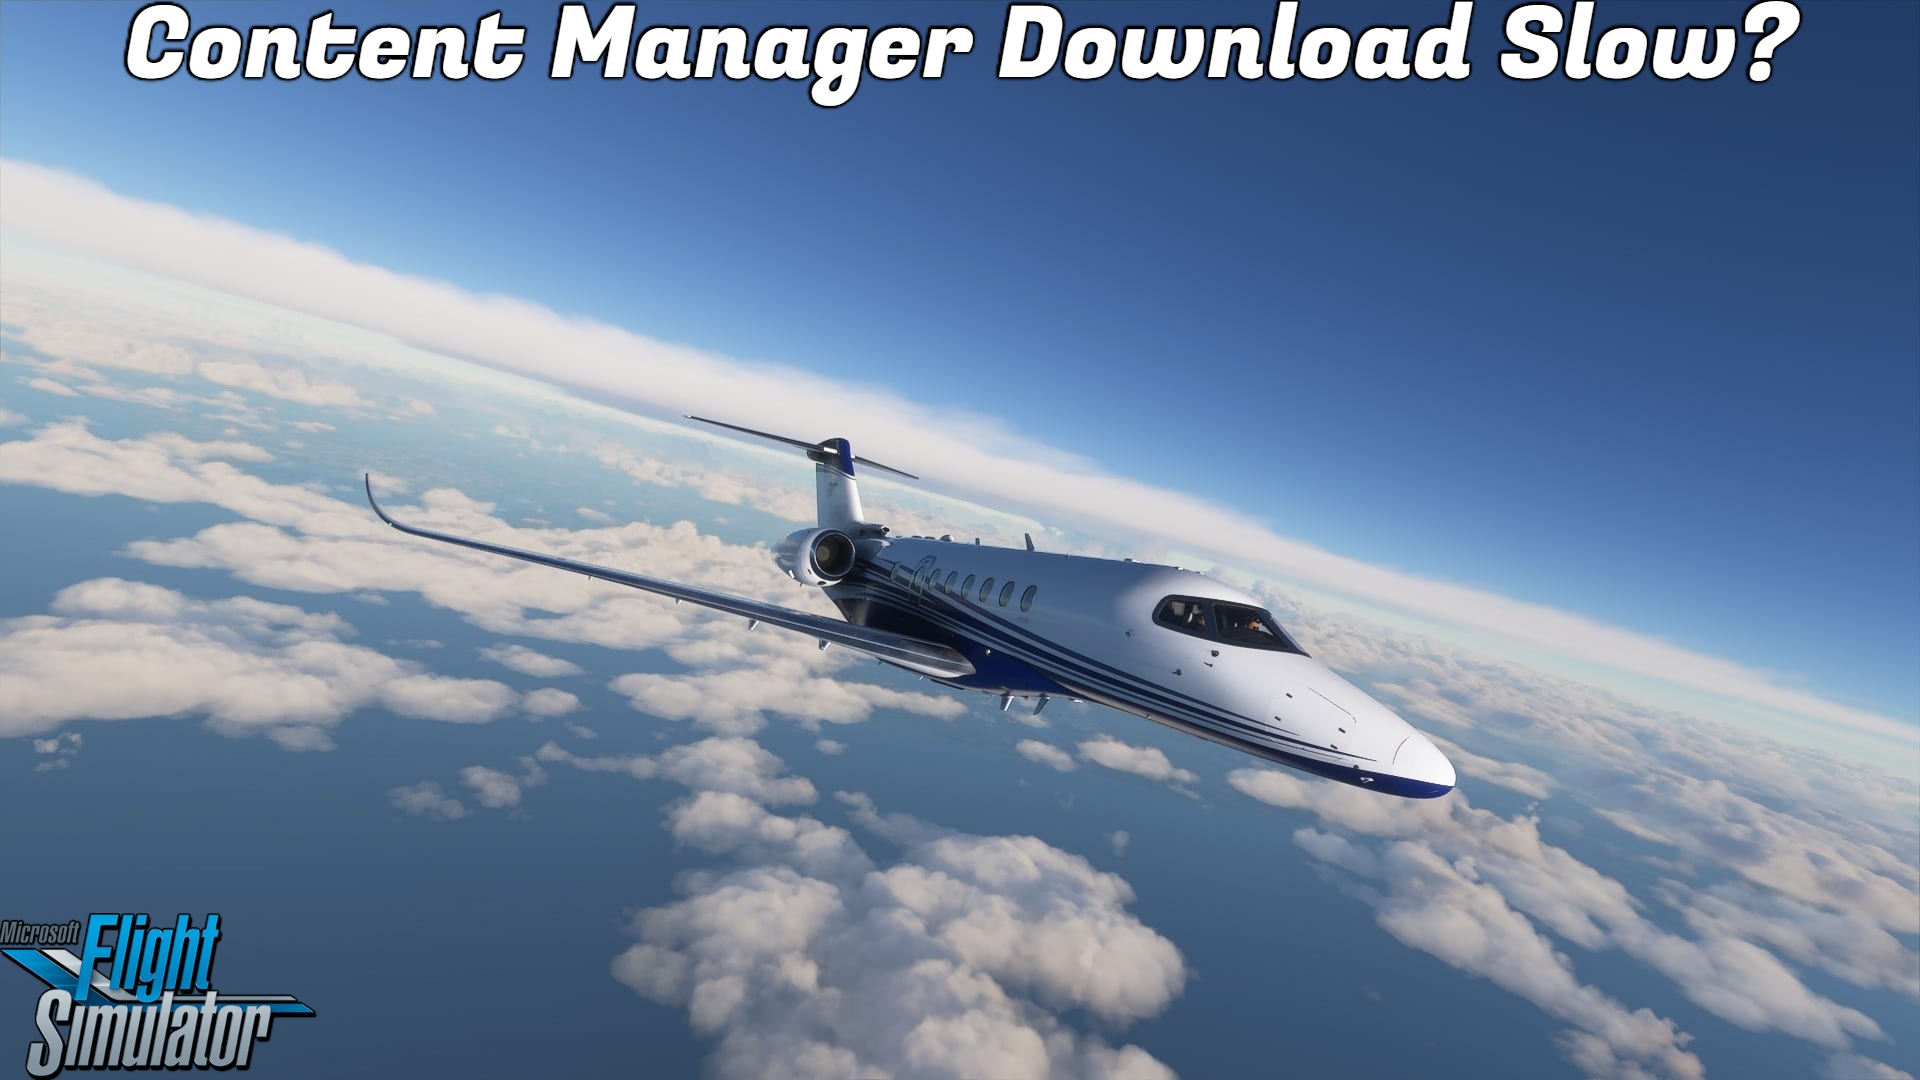 You are currently viewing Microsoft Flight Simulator Content Manager Download Slow?